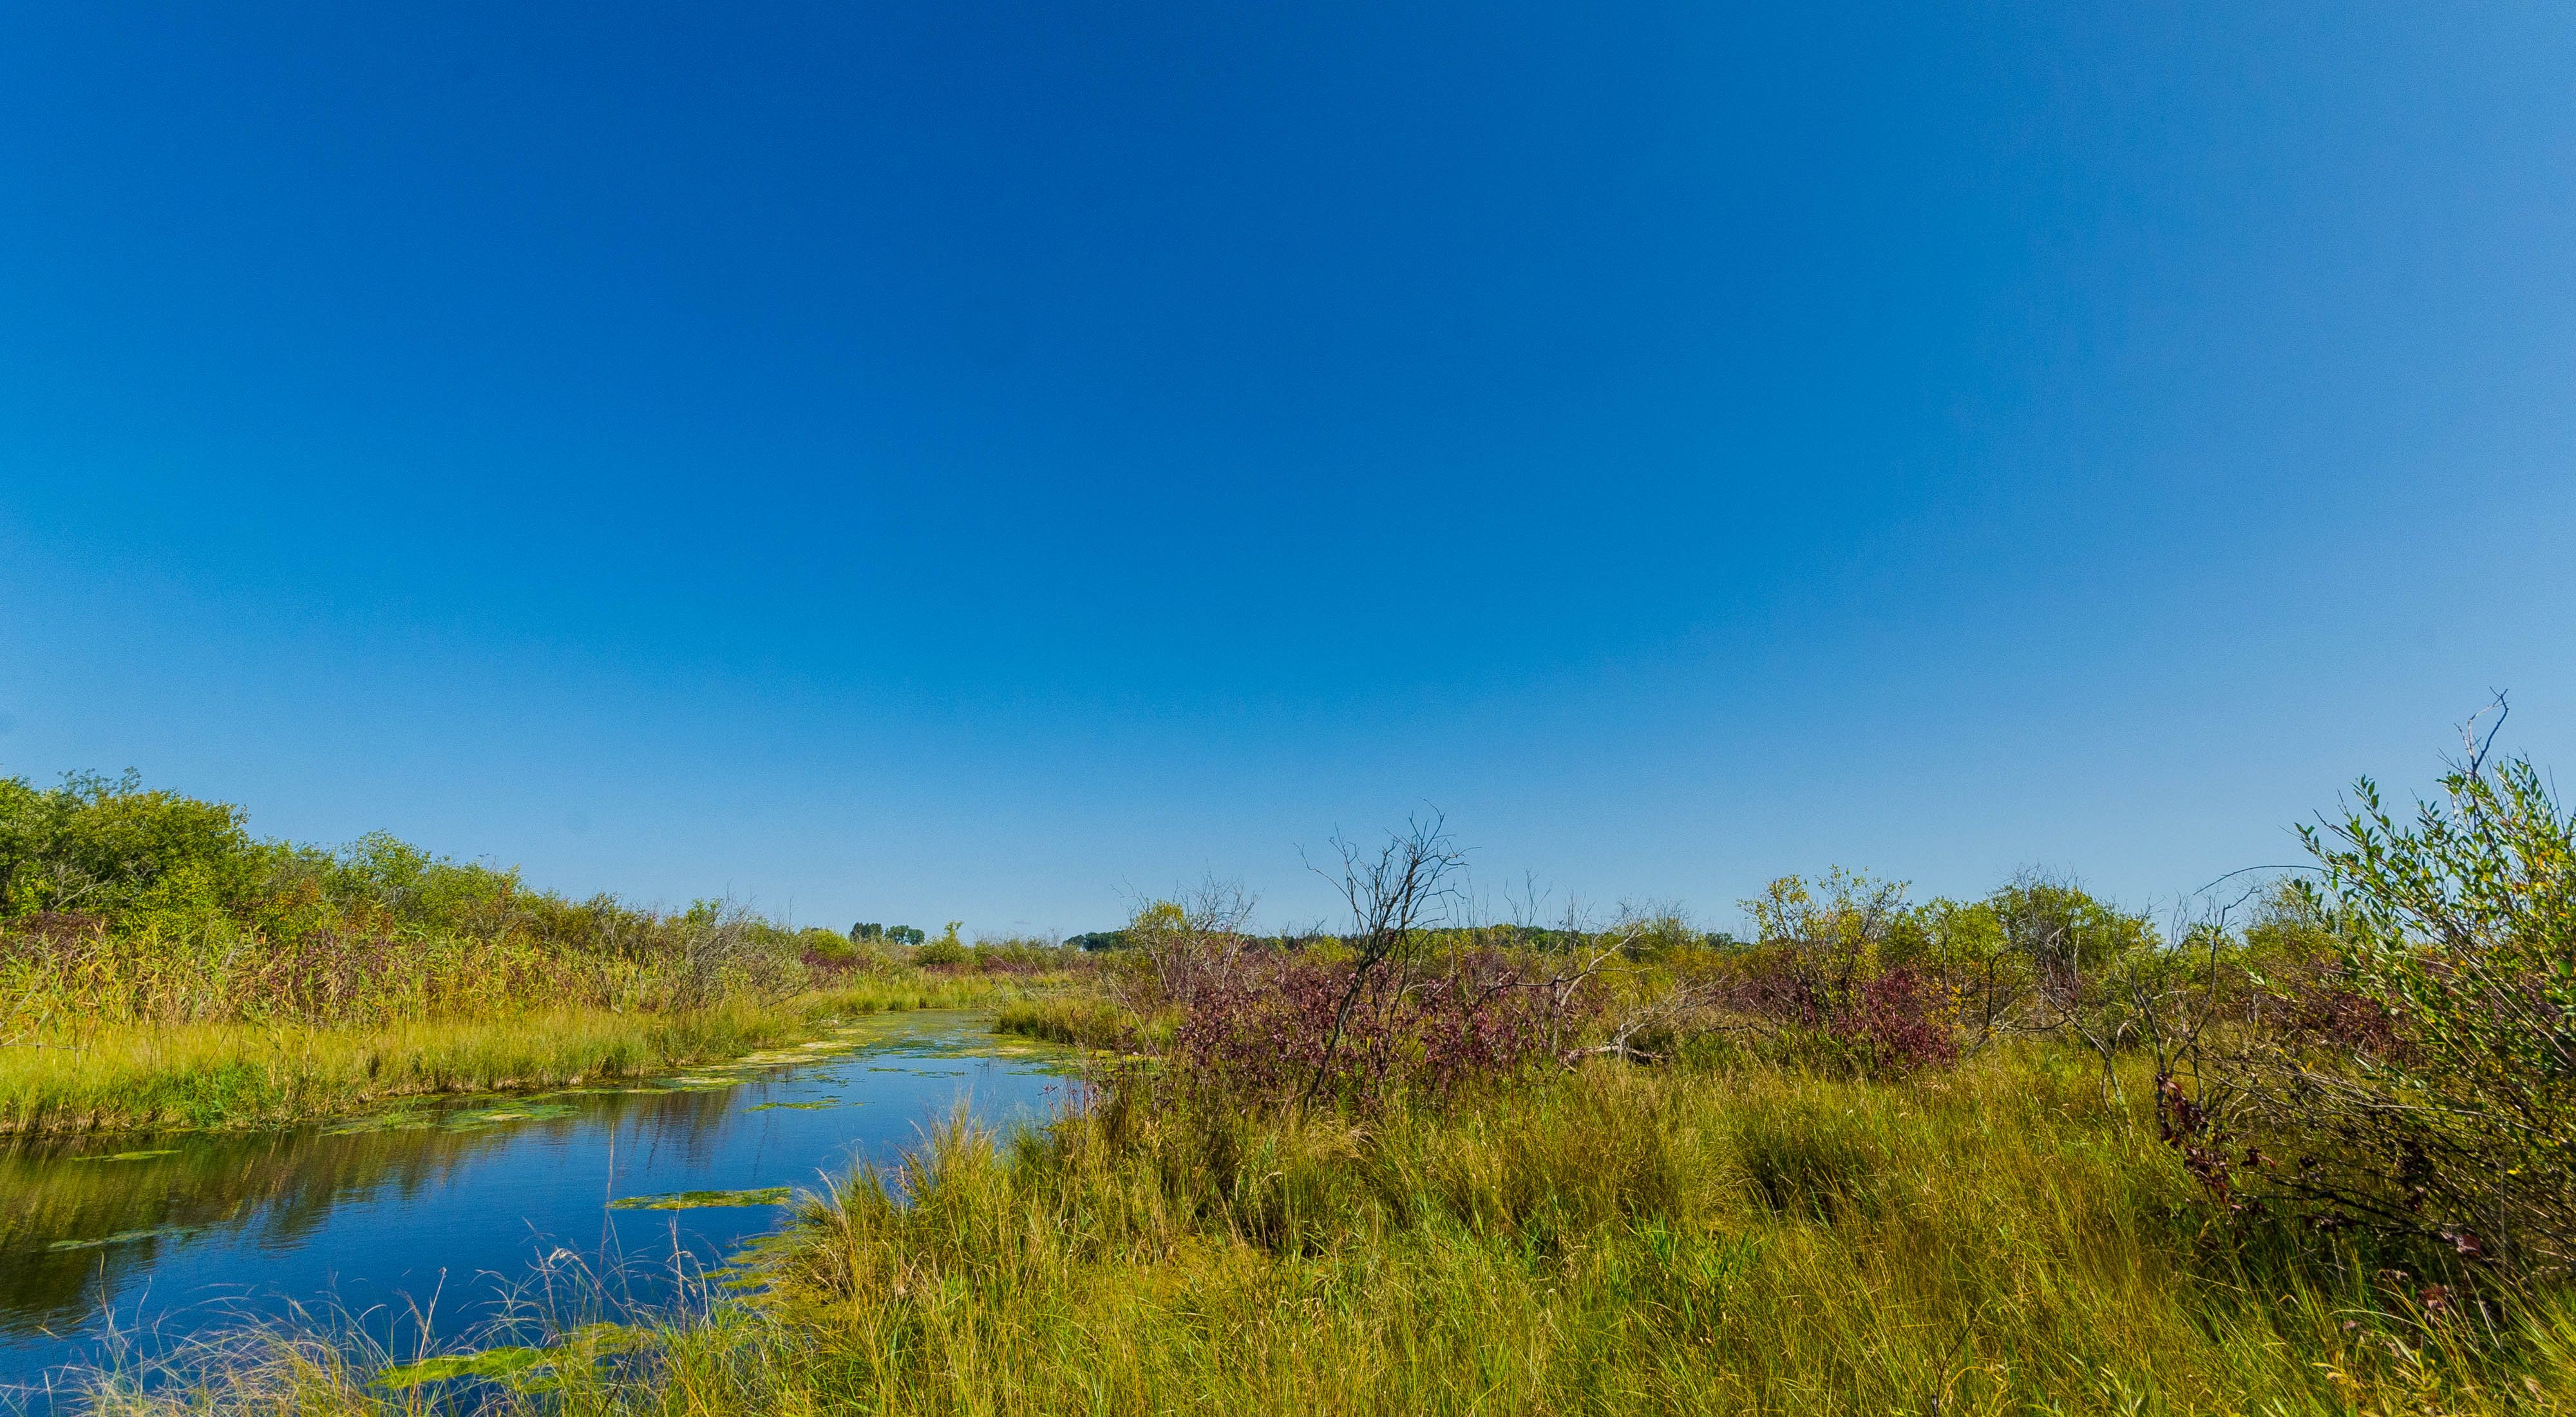 small stream meanders through green wetlands under a bright blue sky during summer